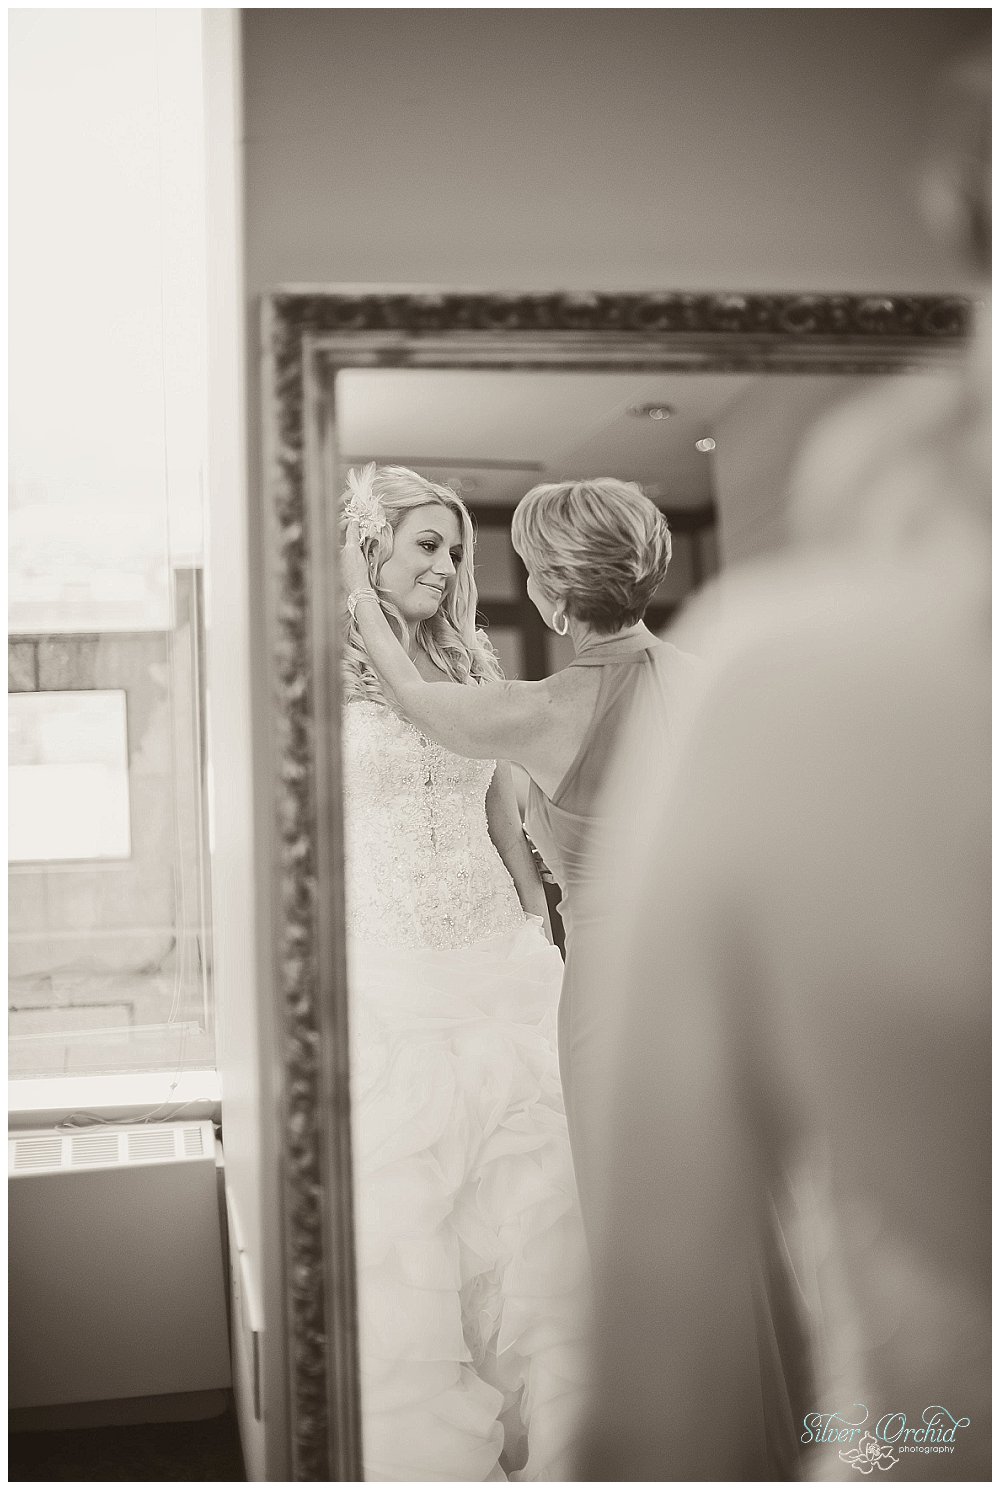 ©Silver Orchid Photography_wedding photography_FooteTopofTower_silverorchidphotography.com_0003.jpg